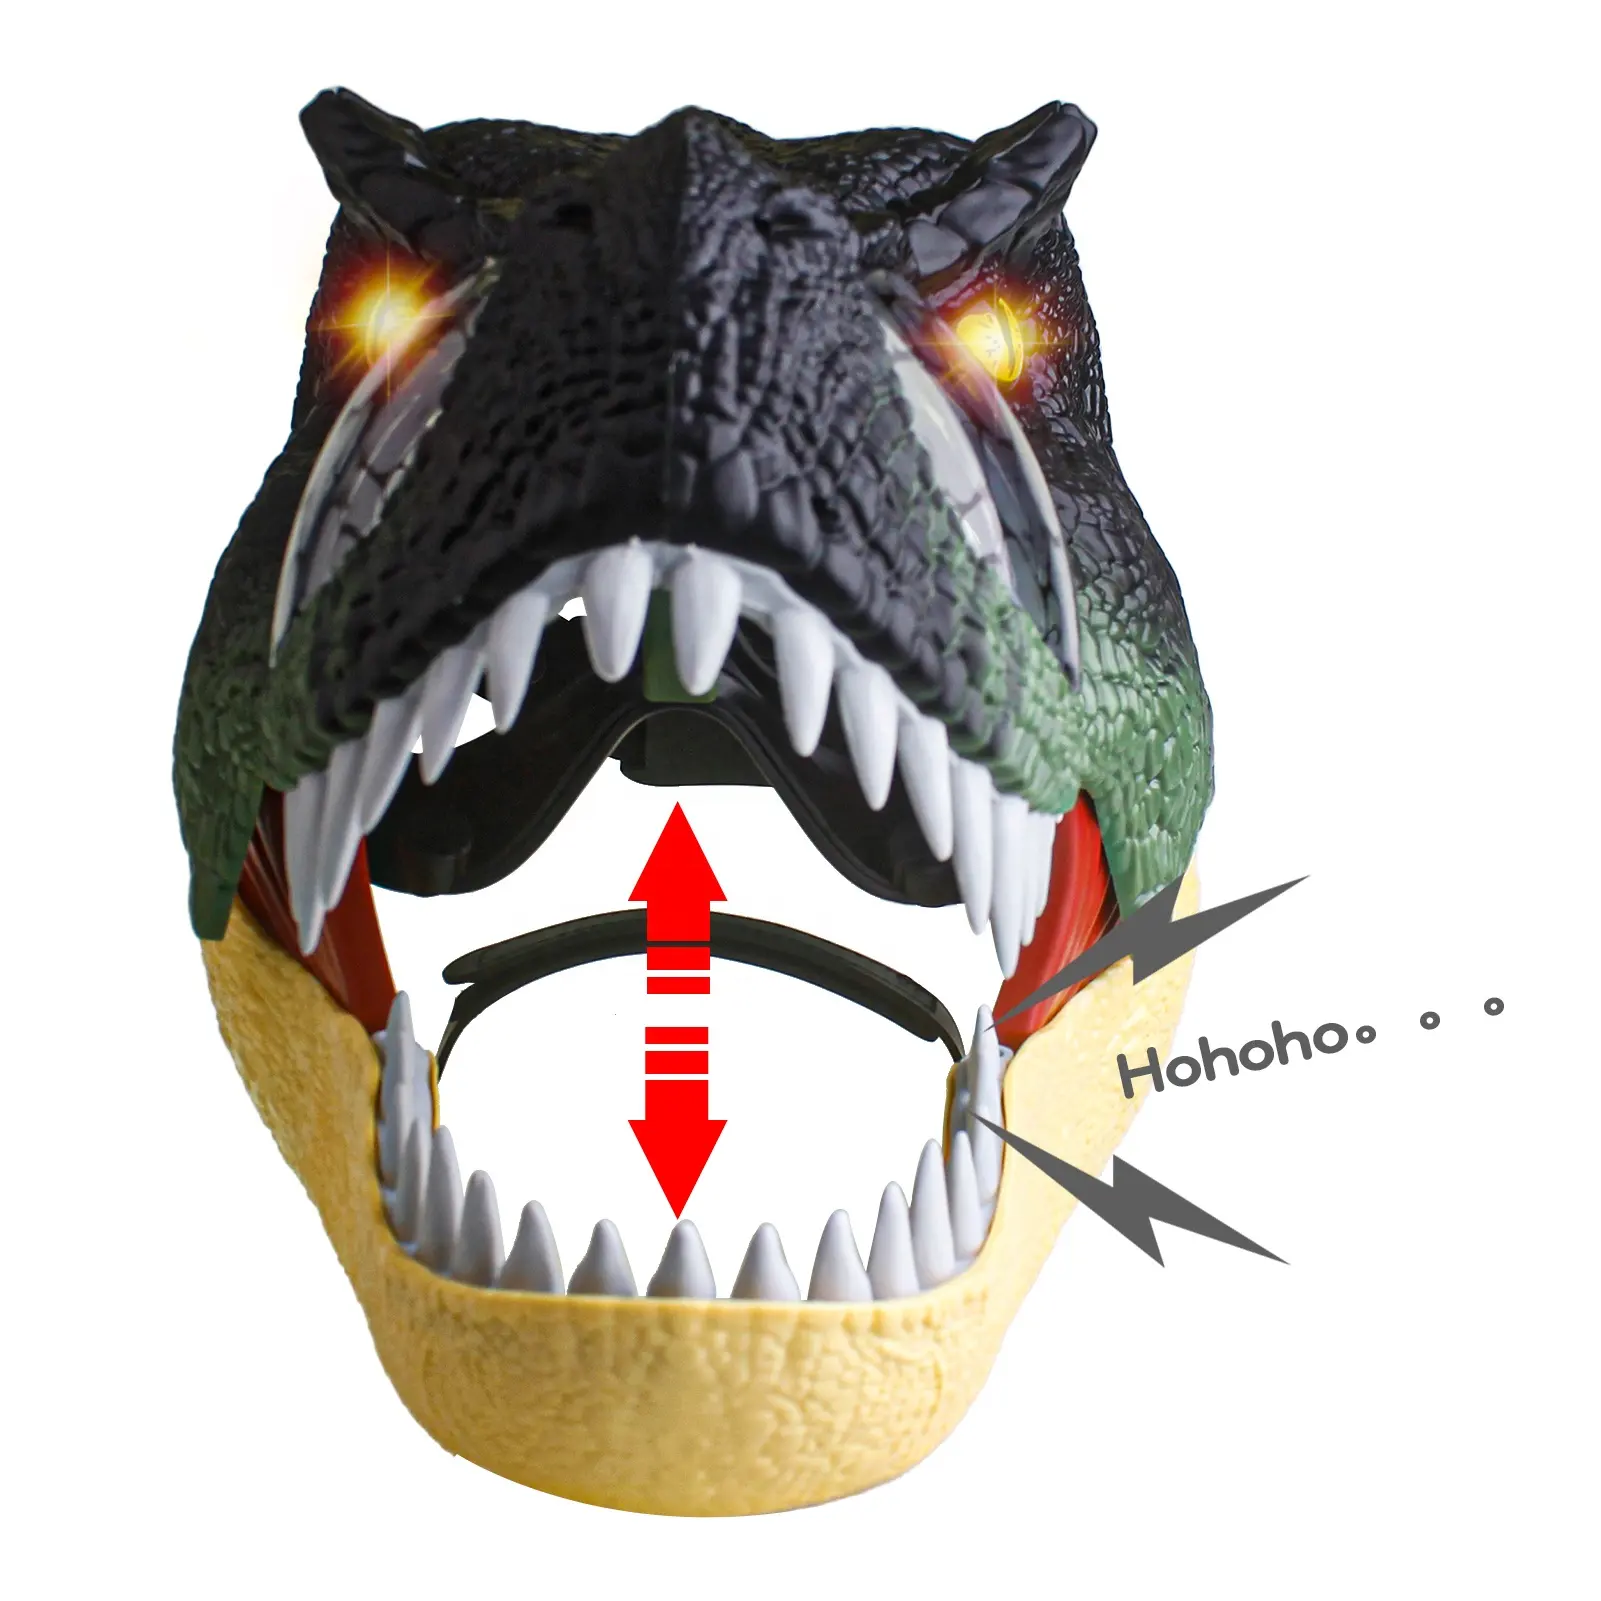 Party Role-Play Gift Realistic Moving Opening Jaw Tyrannosaurus Rex Dinosaur Helmet Mask With Sound and Light For Costume